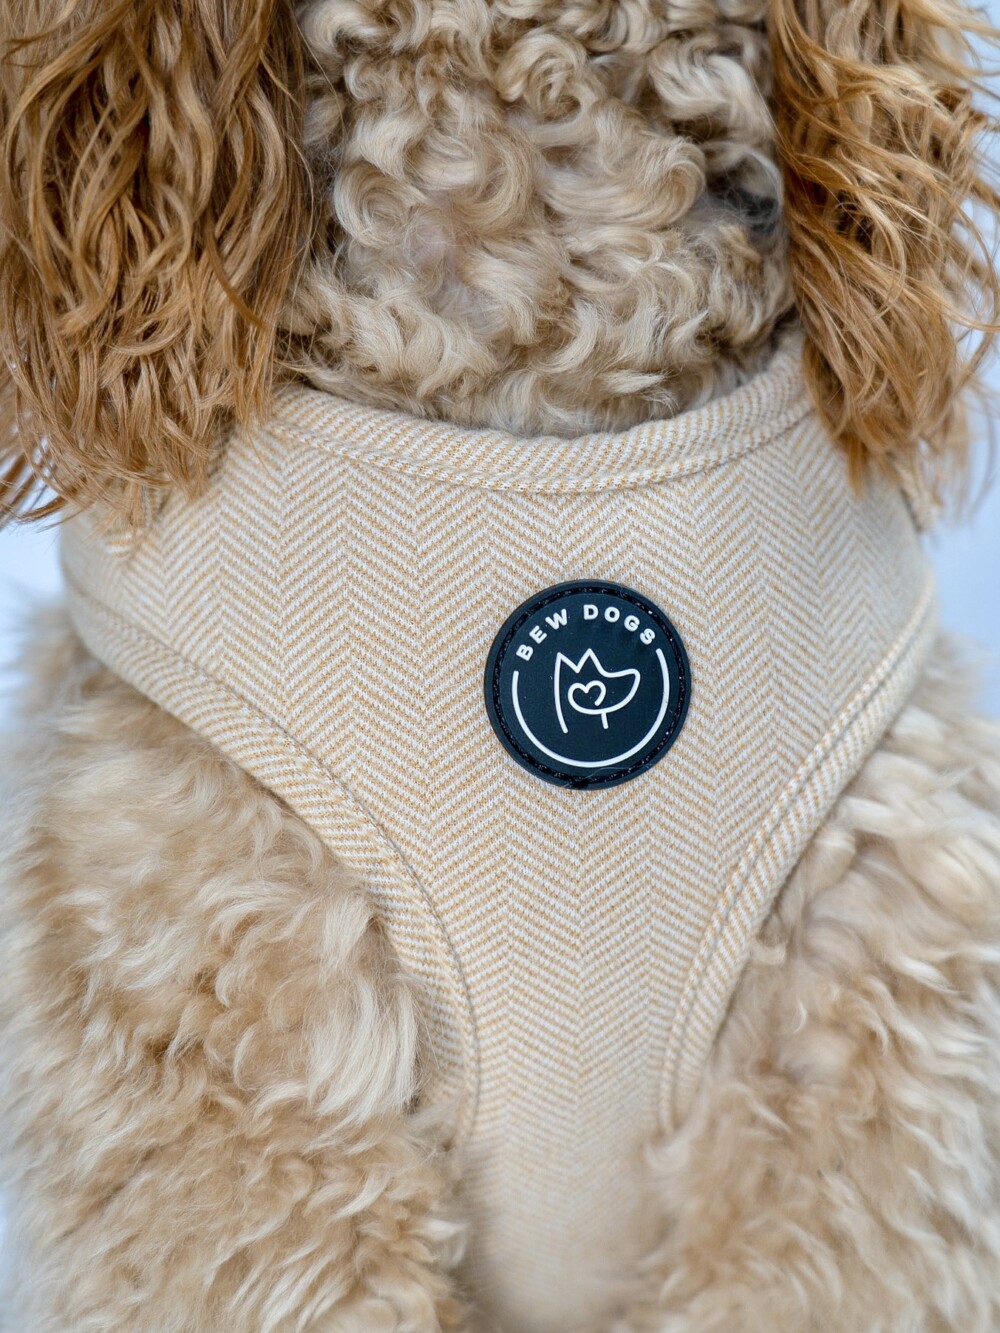 A close up of a cream harness on a biege dog with the Bew Dogs logo